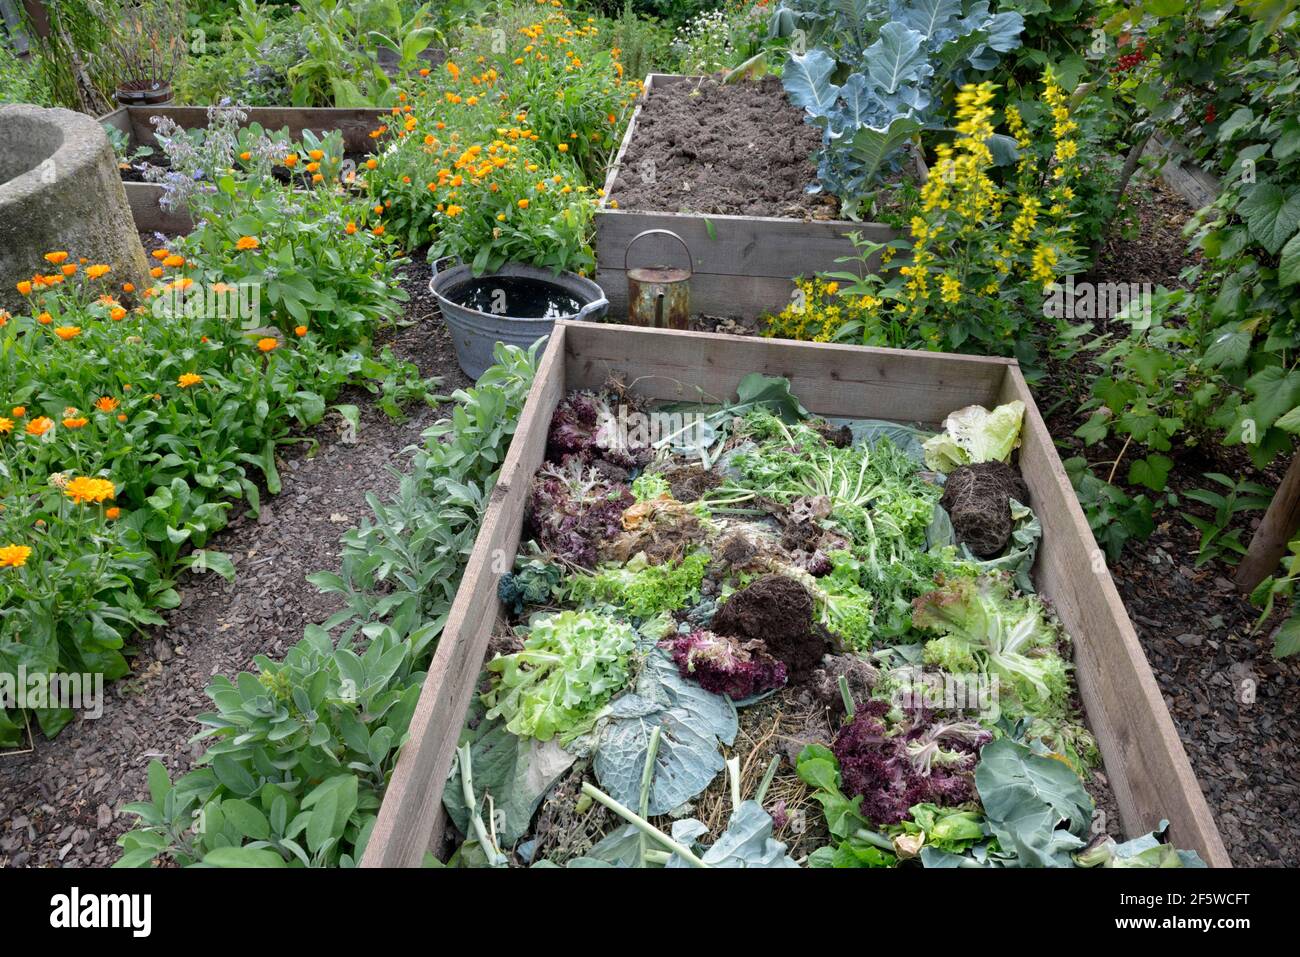 https://c8.alamy.com/comp/2F5WCFT/composting-in-the-frame-bed-compost-compost-box-2F5WCFT.jpg